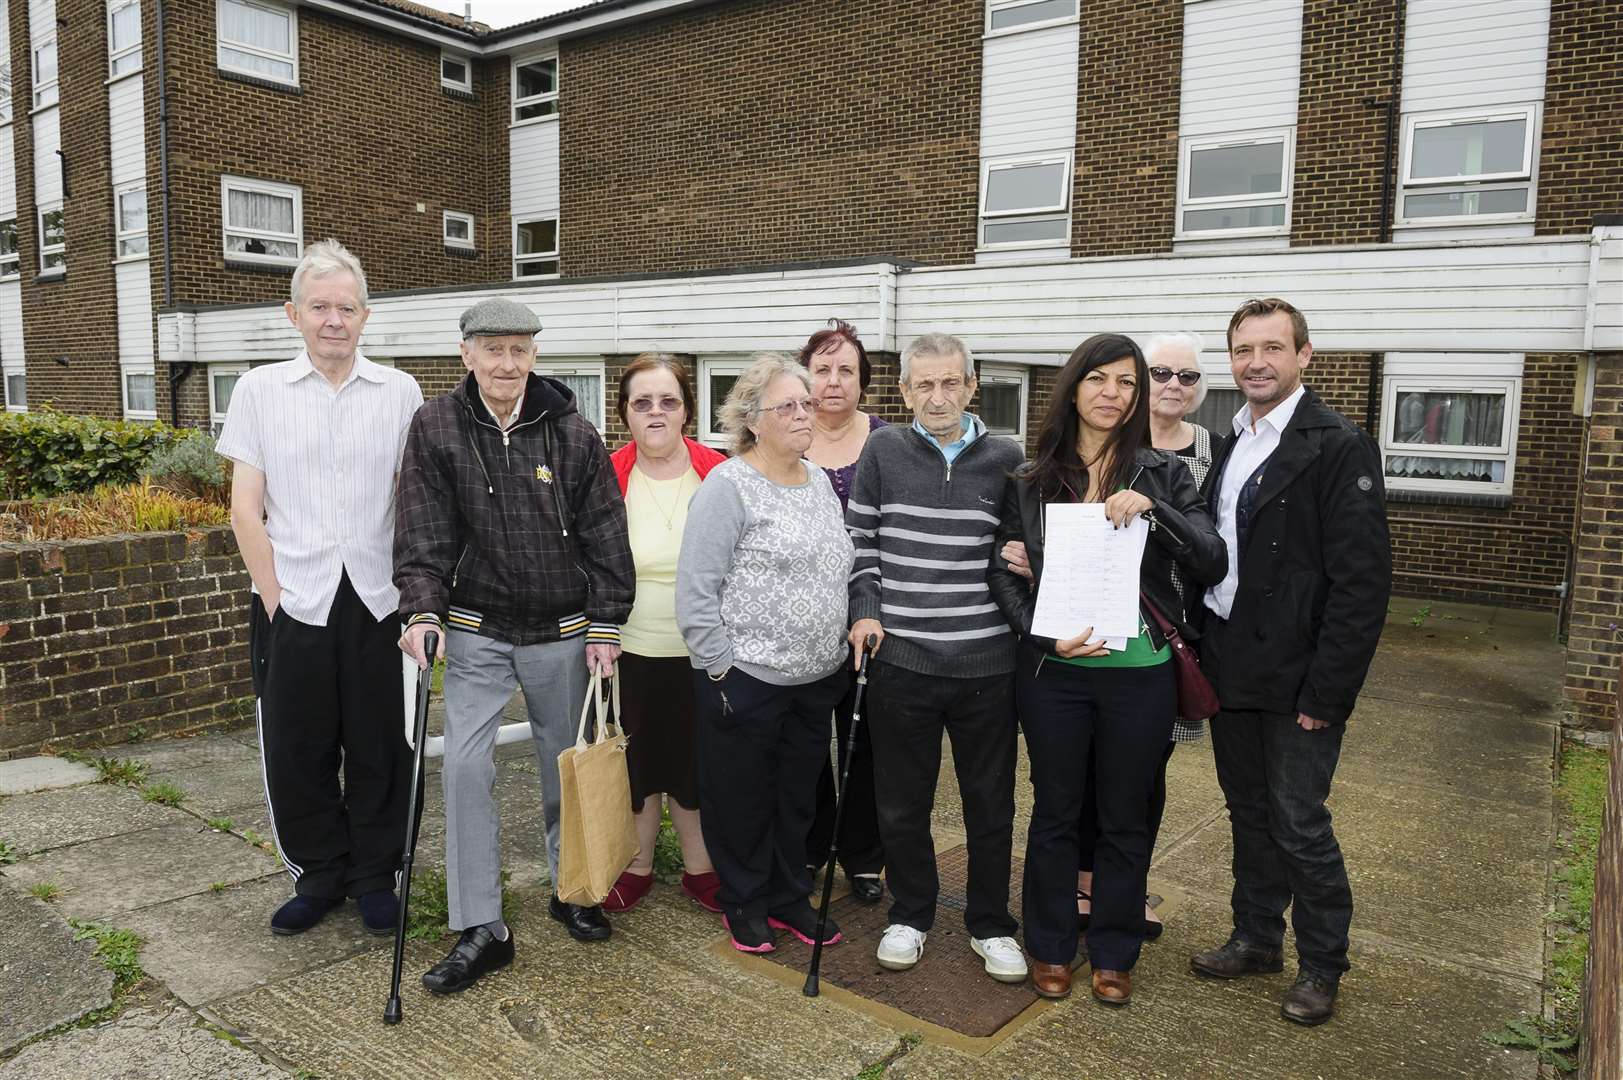 Pakize Guvenc holds the petitions with Peter Scollard, right, and residents of Cleveland House